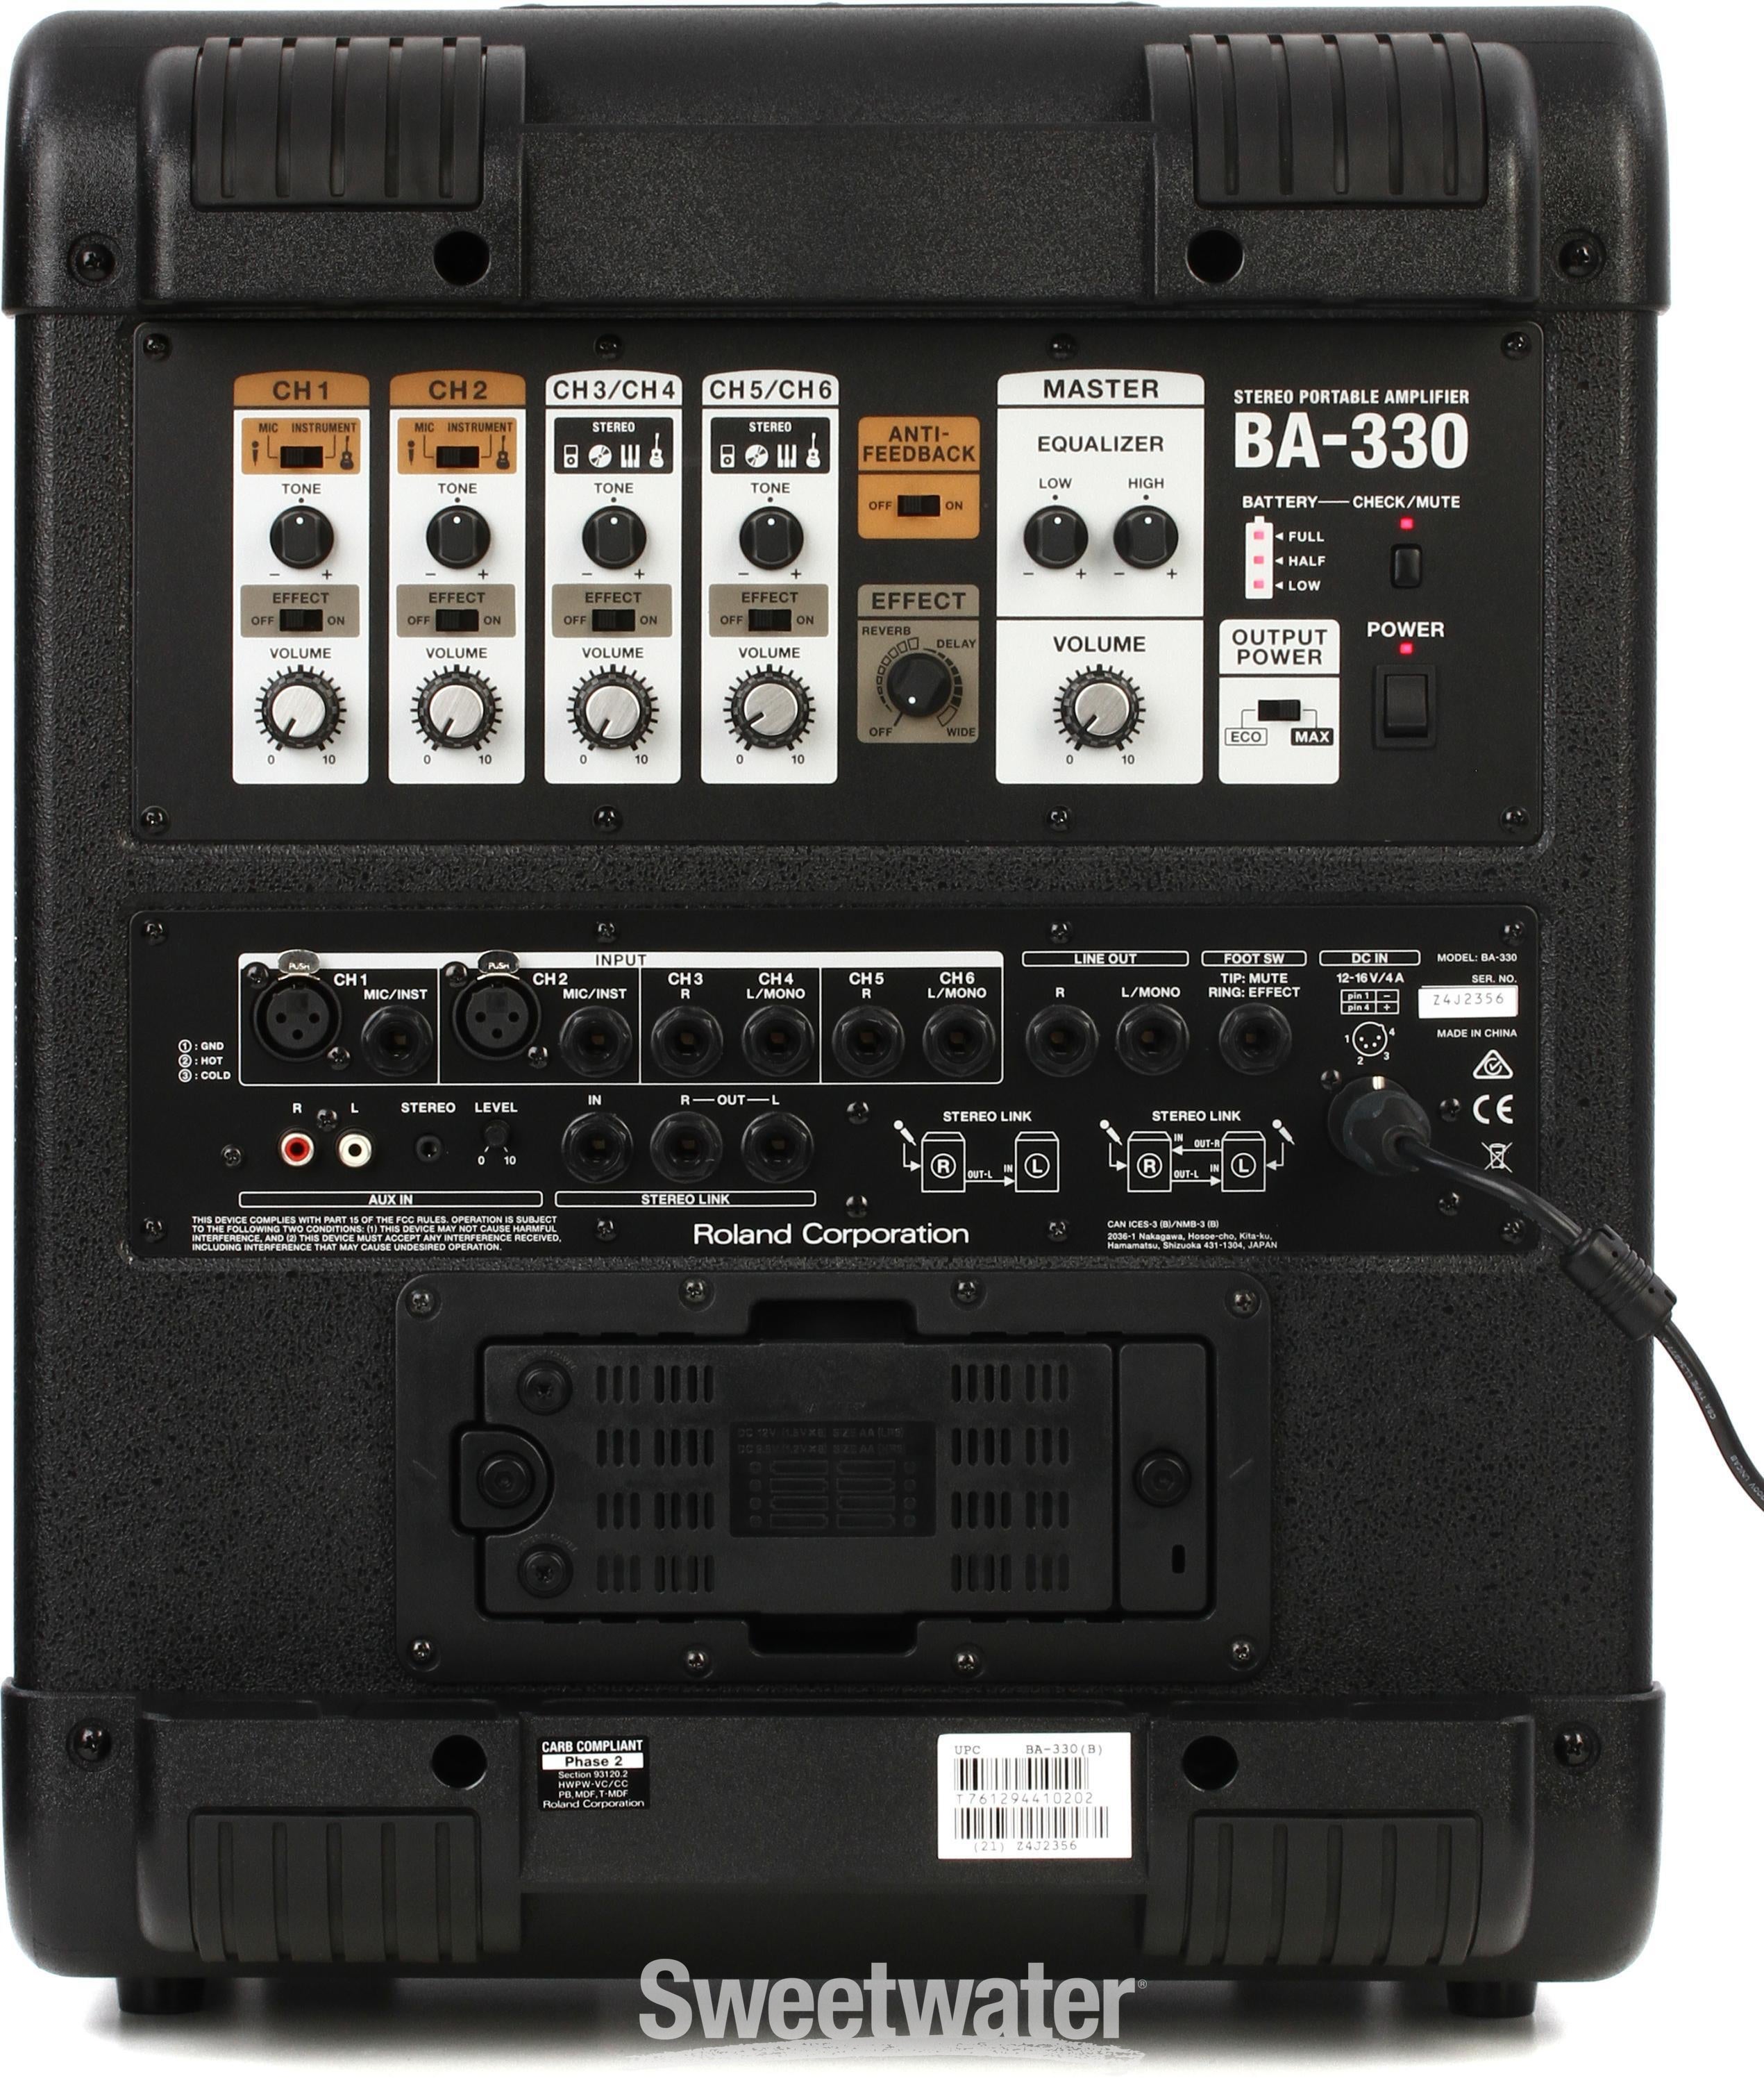 Roland BA-330 Portable Stereo PA System | Sweetwater